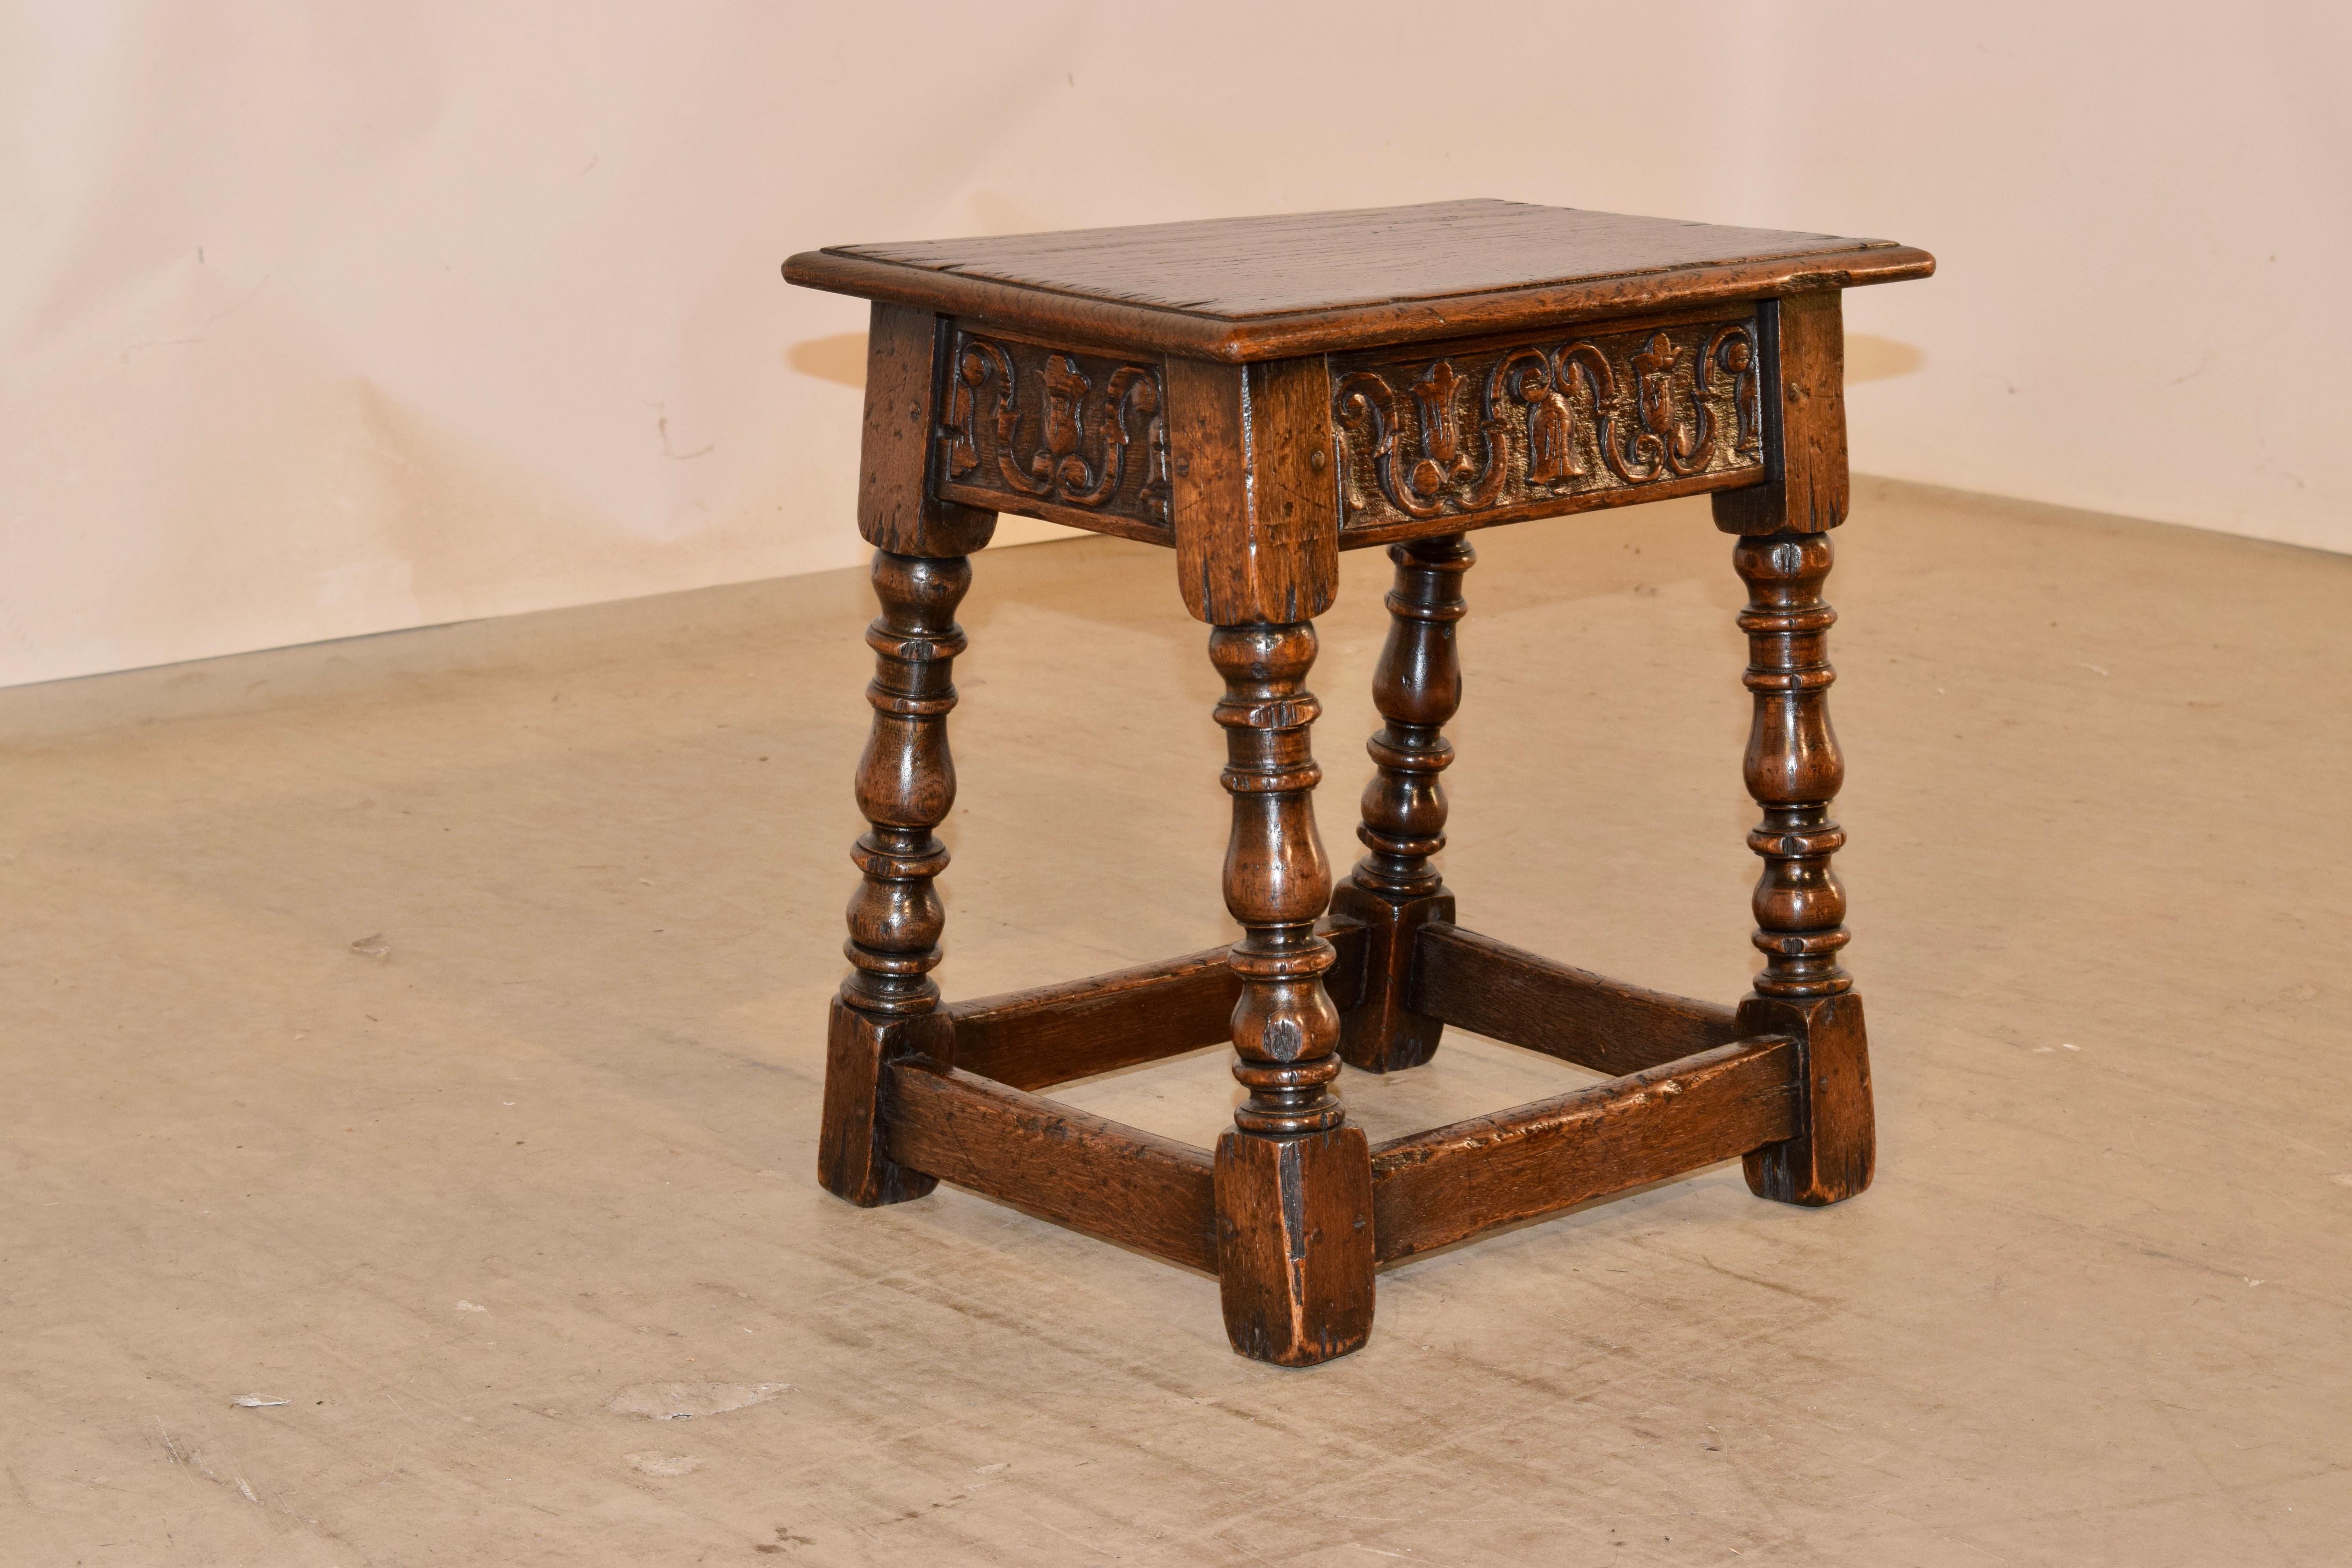 19th century oak joint stool from England with a beveled edge around the top, following down to a hand carved decorated apron with lovely floral and scrolls and supported on hand turned and splayed legs, joined by simple stretchers.